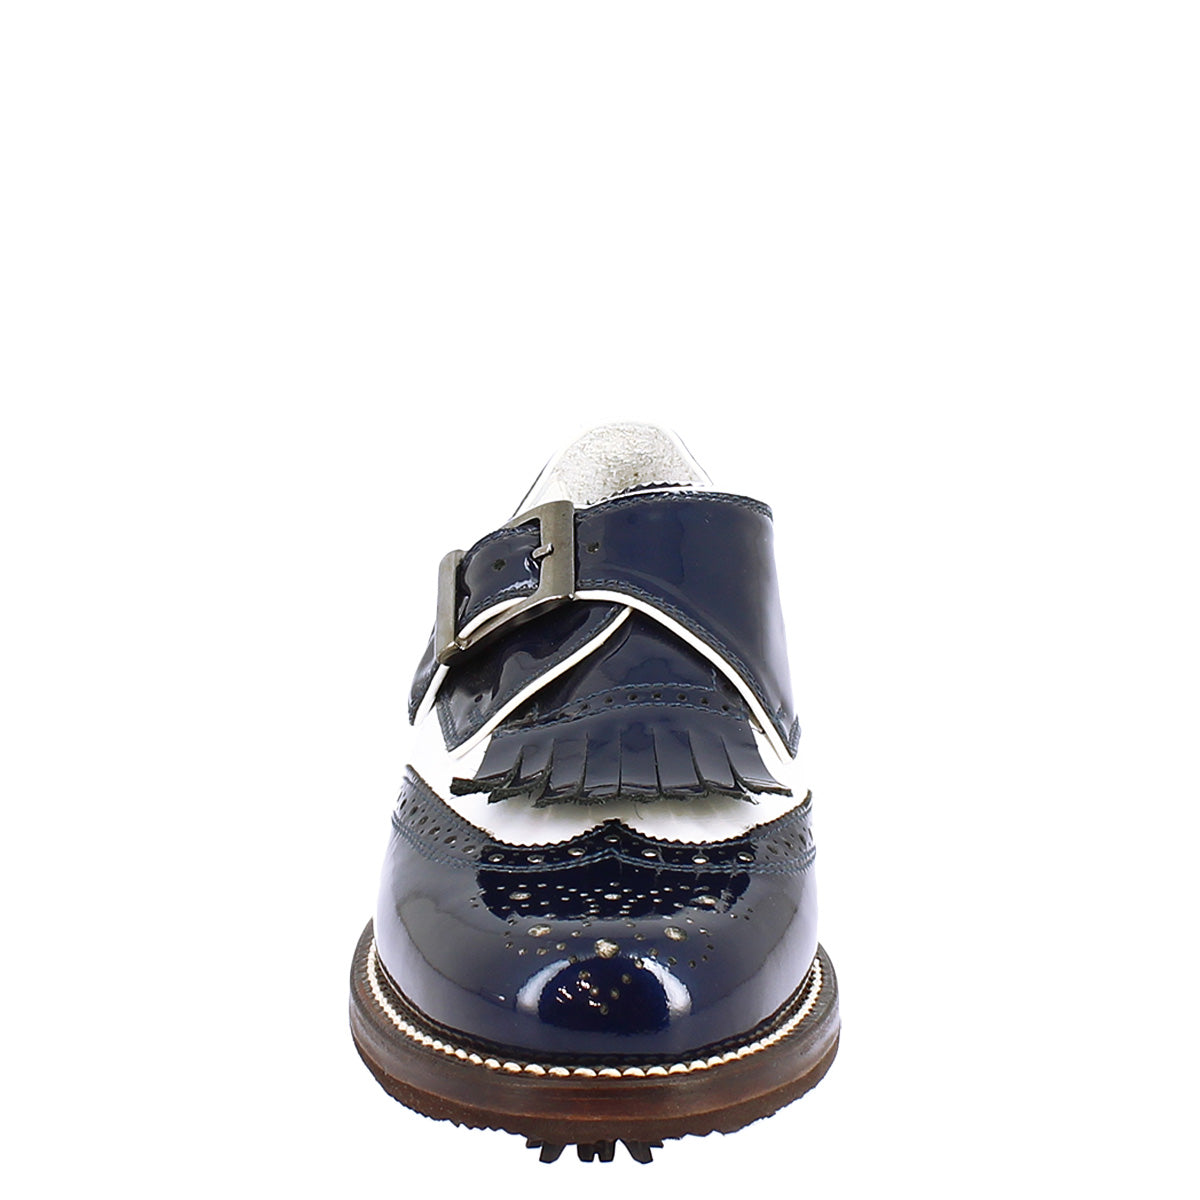 Men's buckle shoes in white leather and blue patent leather